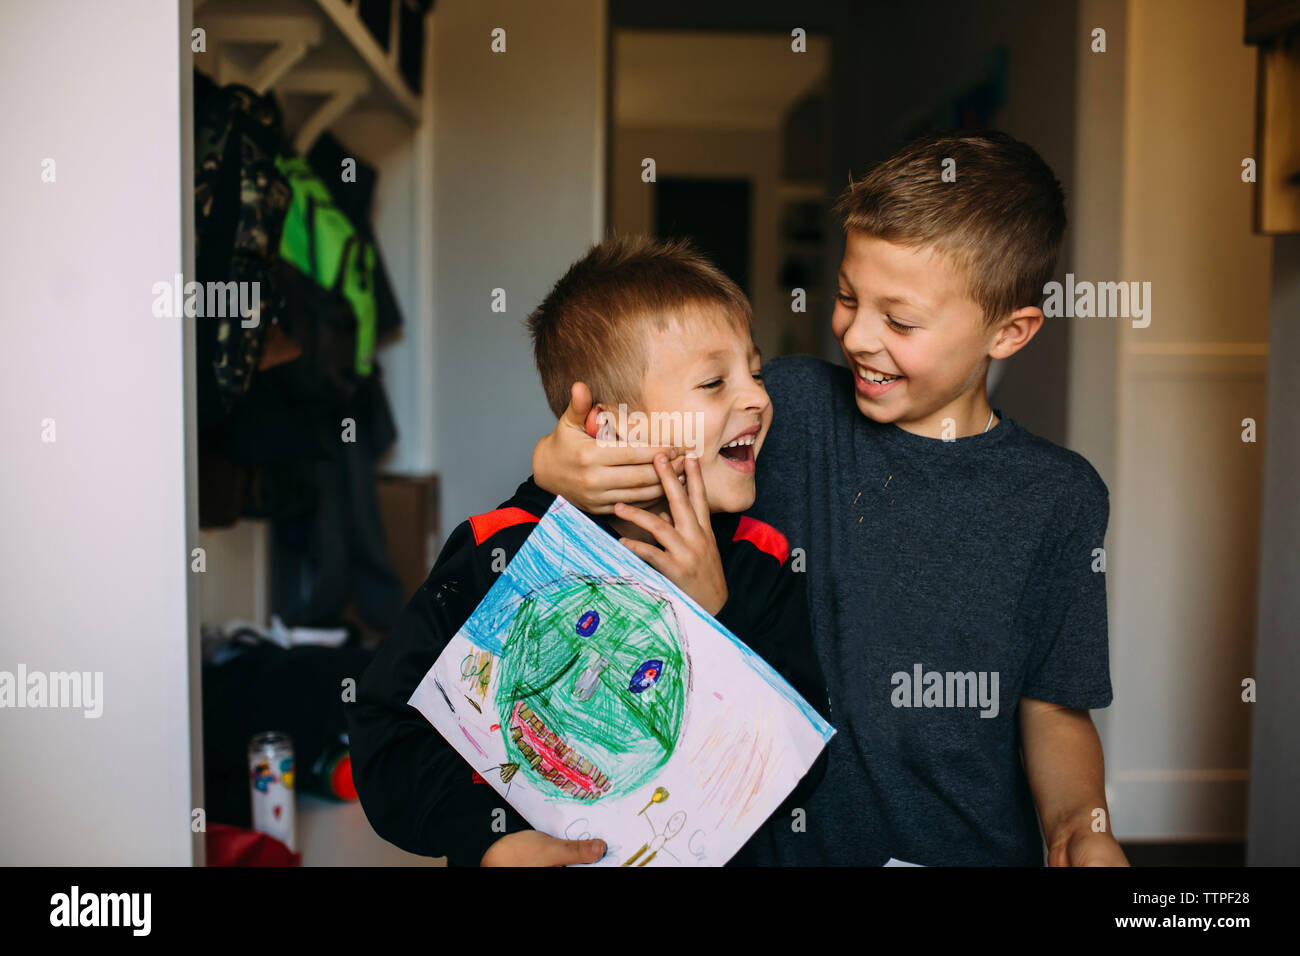 Cheerful boy holding brother's face while playing at home Stock Photo